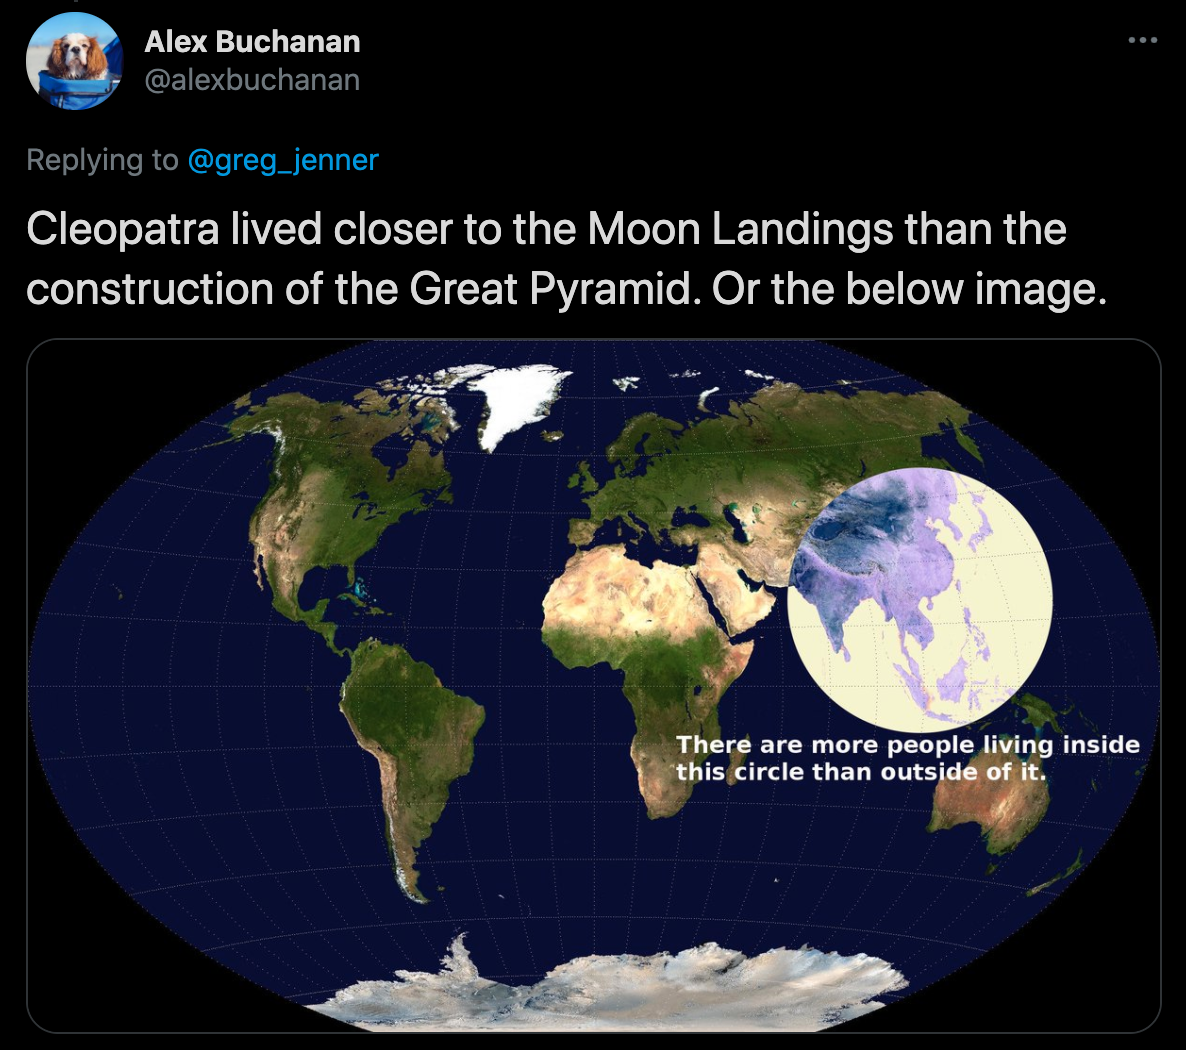 cool facts - Cleopatra lived closer to the Moon Landings than the construction of the Great Pyramid. Or the below image. There are more people living inside this circle than outside of it.